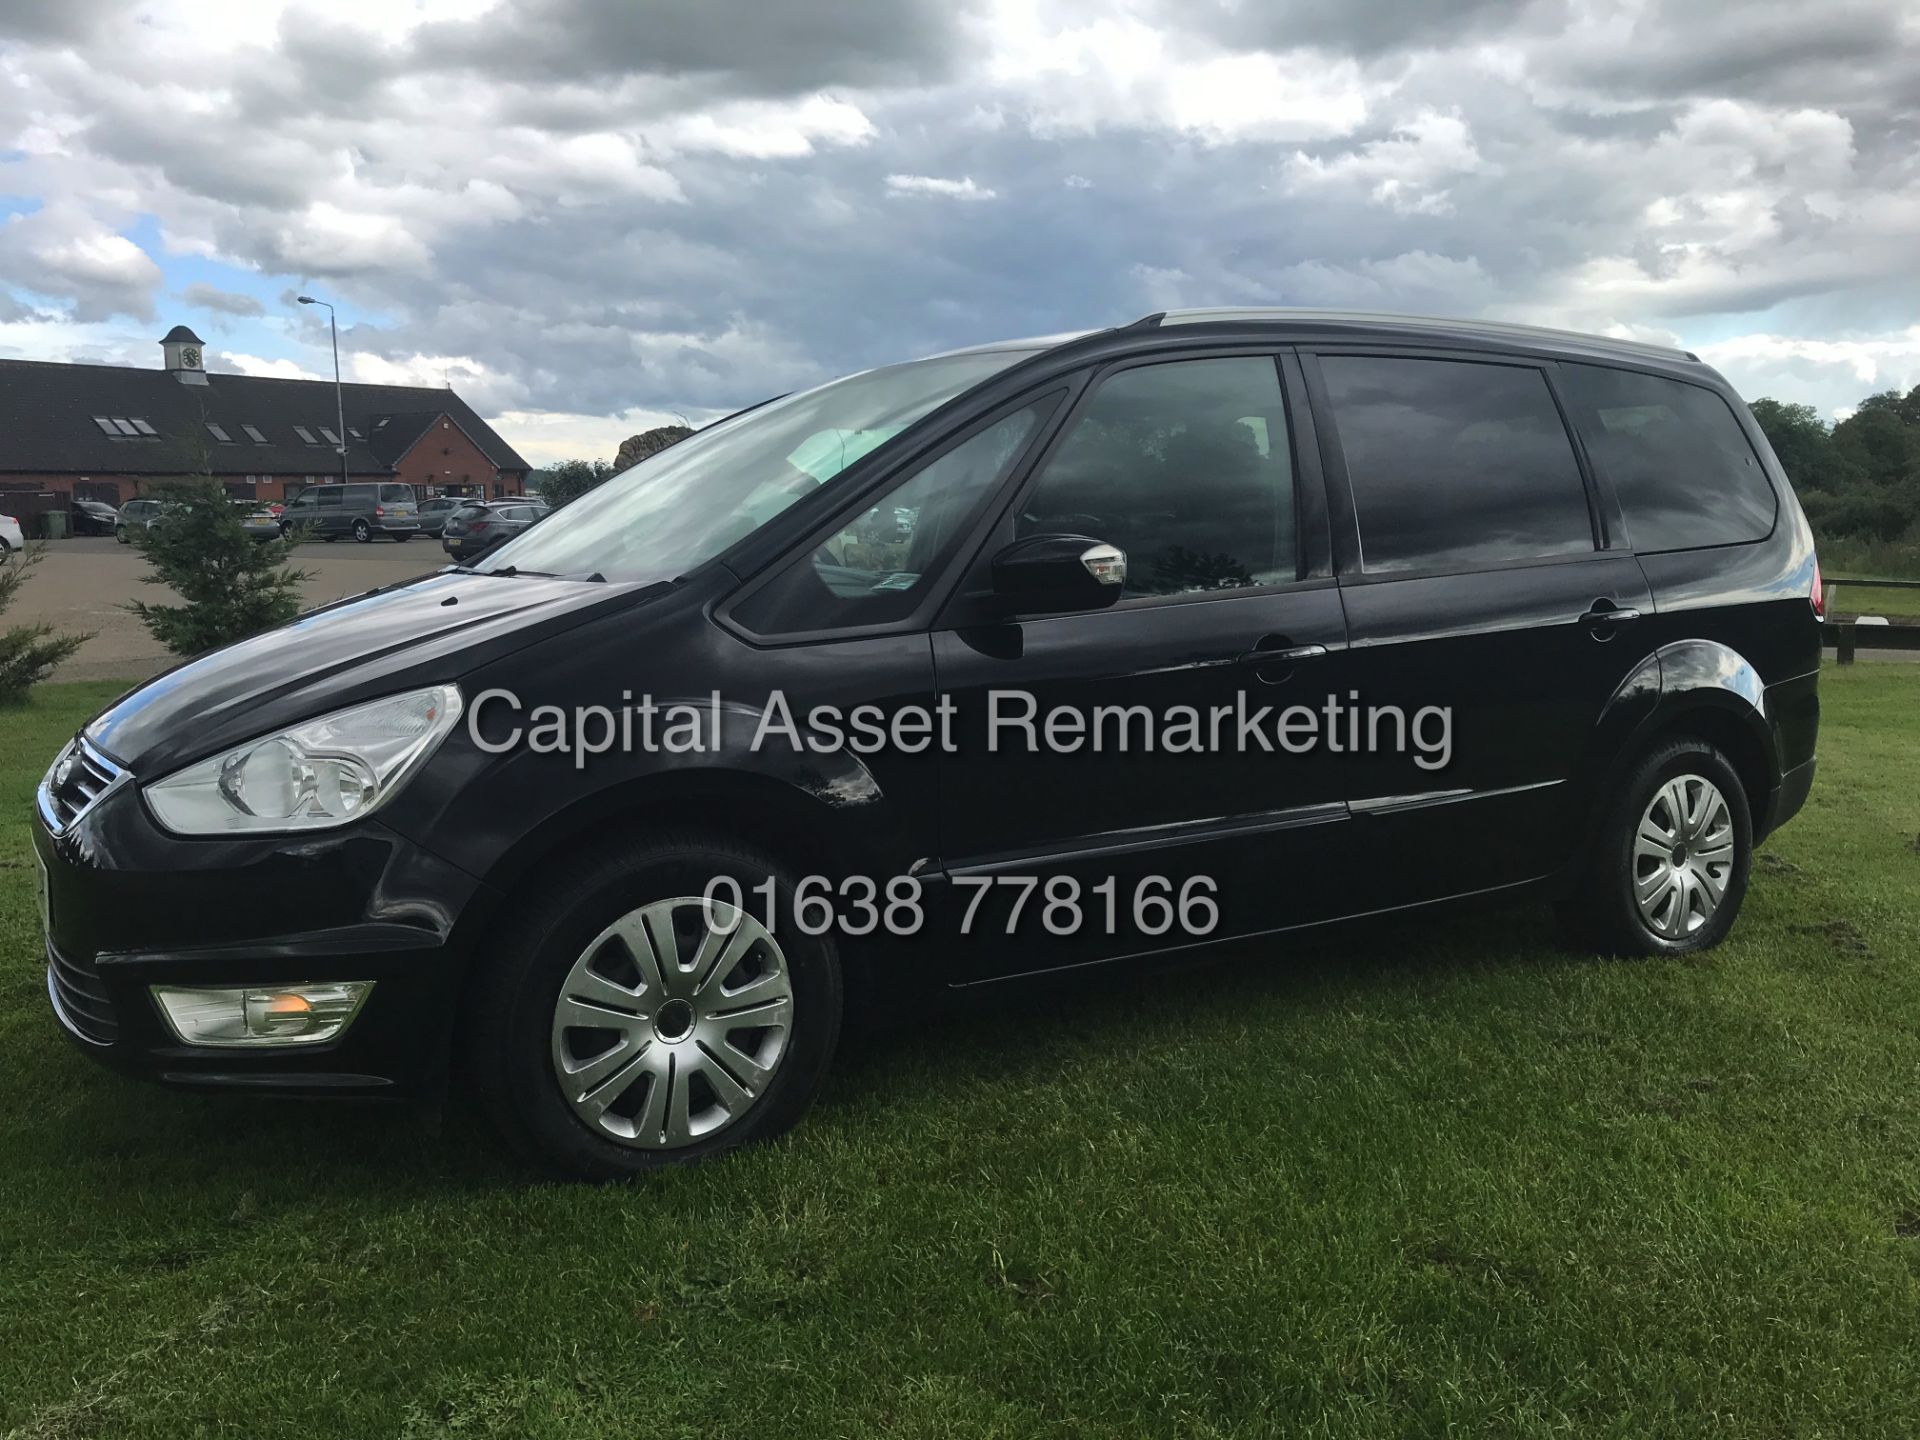 (ON SALE) FORD GALAXY 2.0TDCI "ZETEC" AUTOMATIC 7 SEATER (15 REG) AIR CON - ELEC PACK *NO VAT* - Image 5 of 18